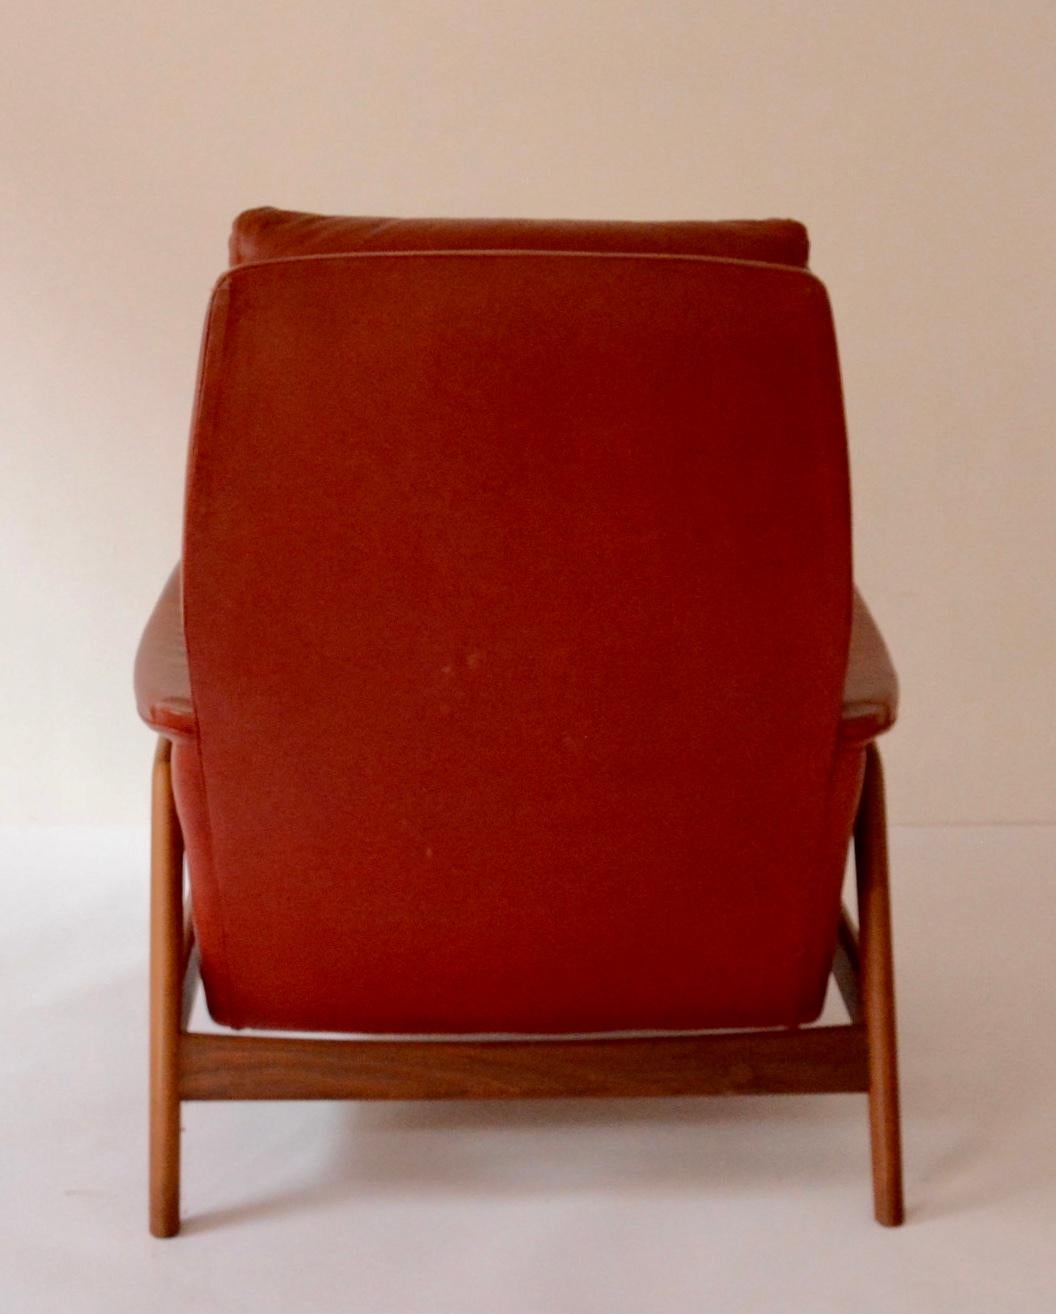 Rare and unique Folke Ohlsson armchair for Dux Møbel AB with red leather upholstery. Very comfortable with tilt function and beautiful combination of wood and red leather.
Literature: Andreas Siesing 'Svenska Möbler' 2015 publisher Atlantis.